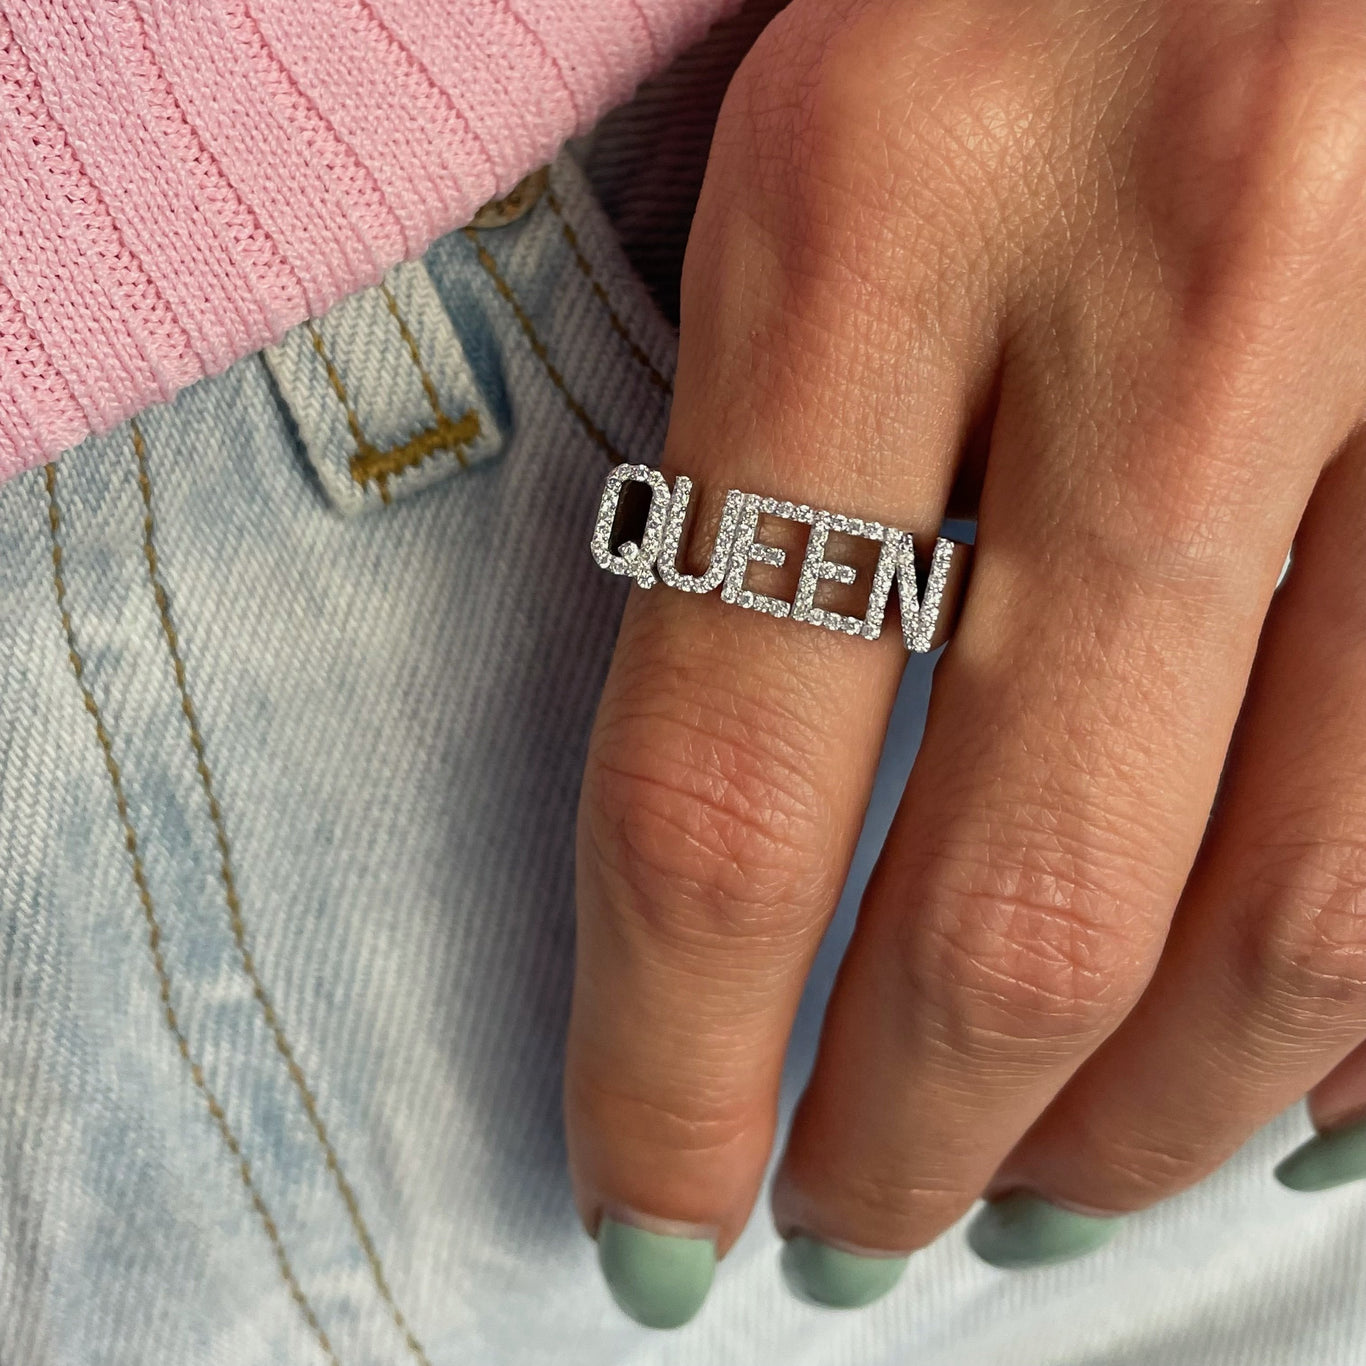 The Custom Name Ring shown with 4 and 6 Letters